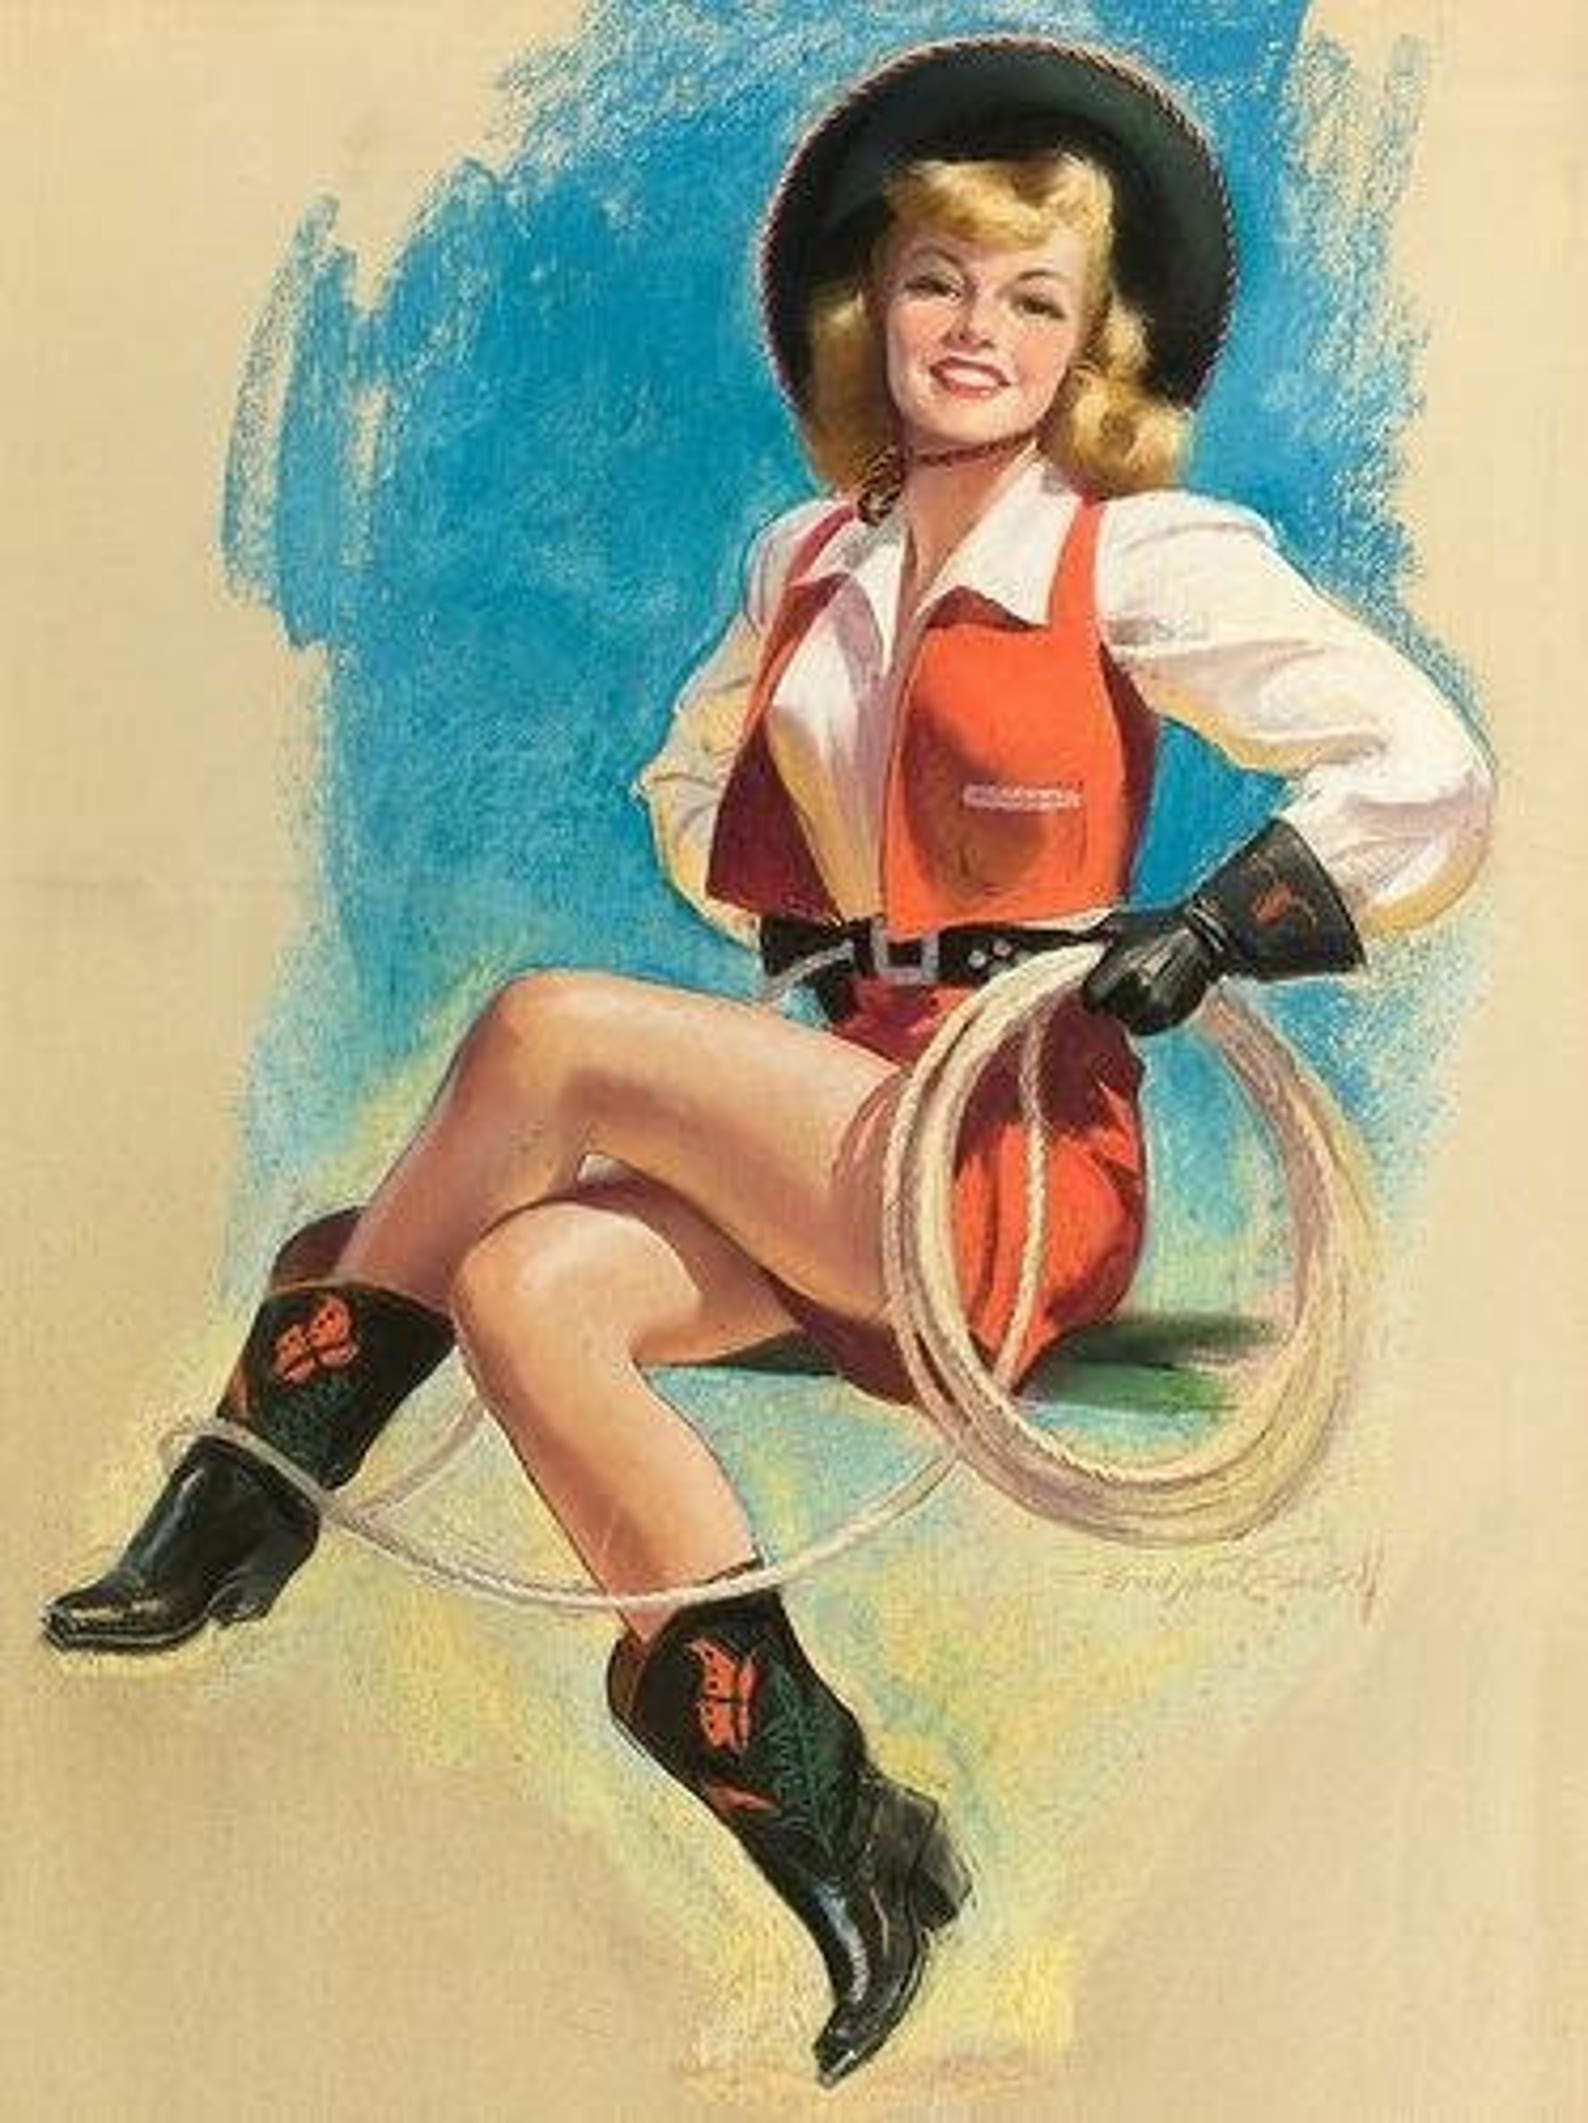 Cowgirls Pin Up Art And Illustrations Trading Cards Set Etsy